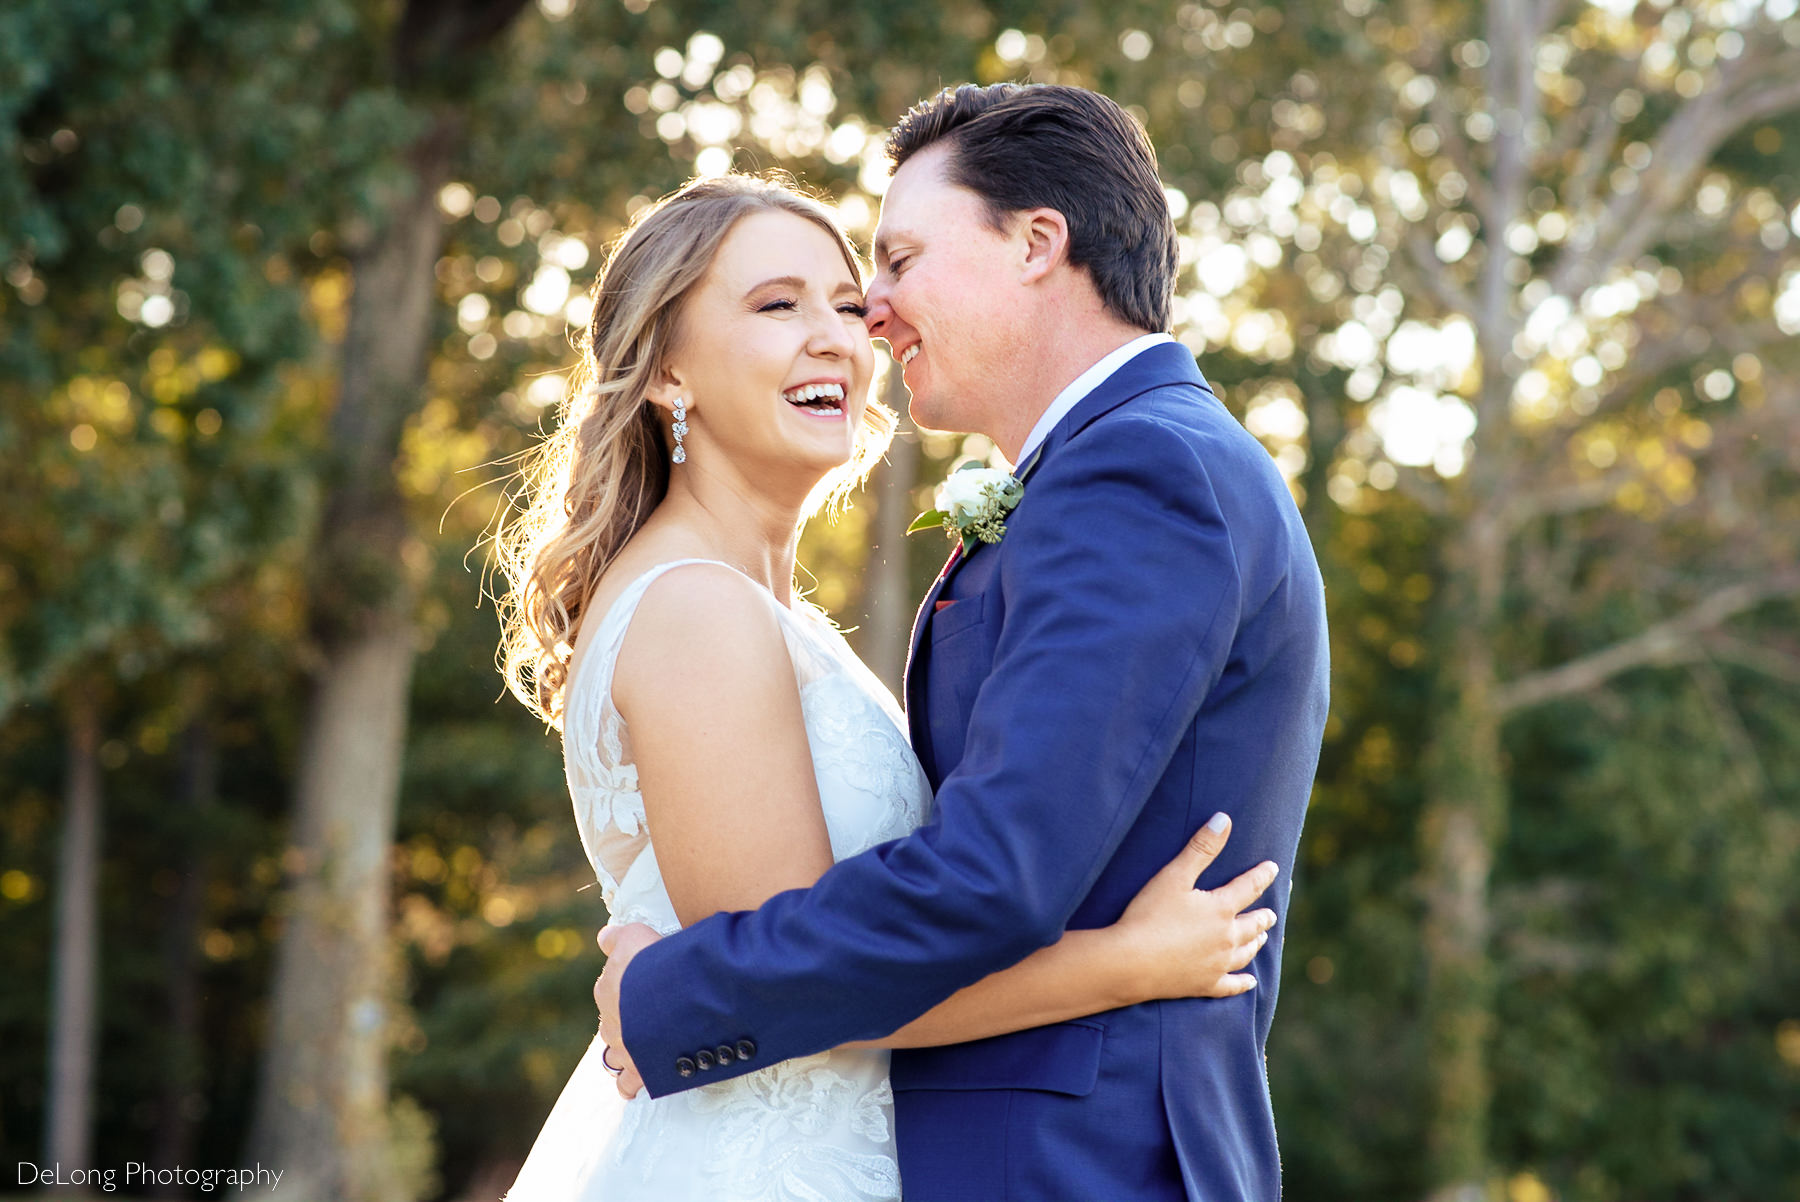 Bride laughing as groom whispers in her ear during sunset at Pine Island Country Club in Charlotte, NC by Charlotte wedding Photographers DeLong Photography